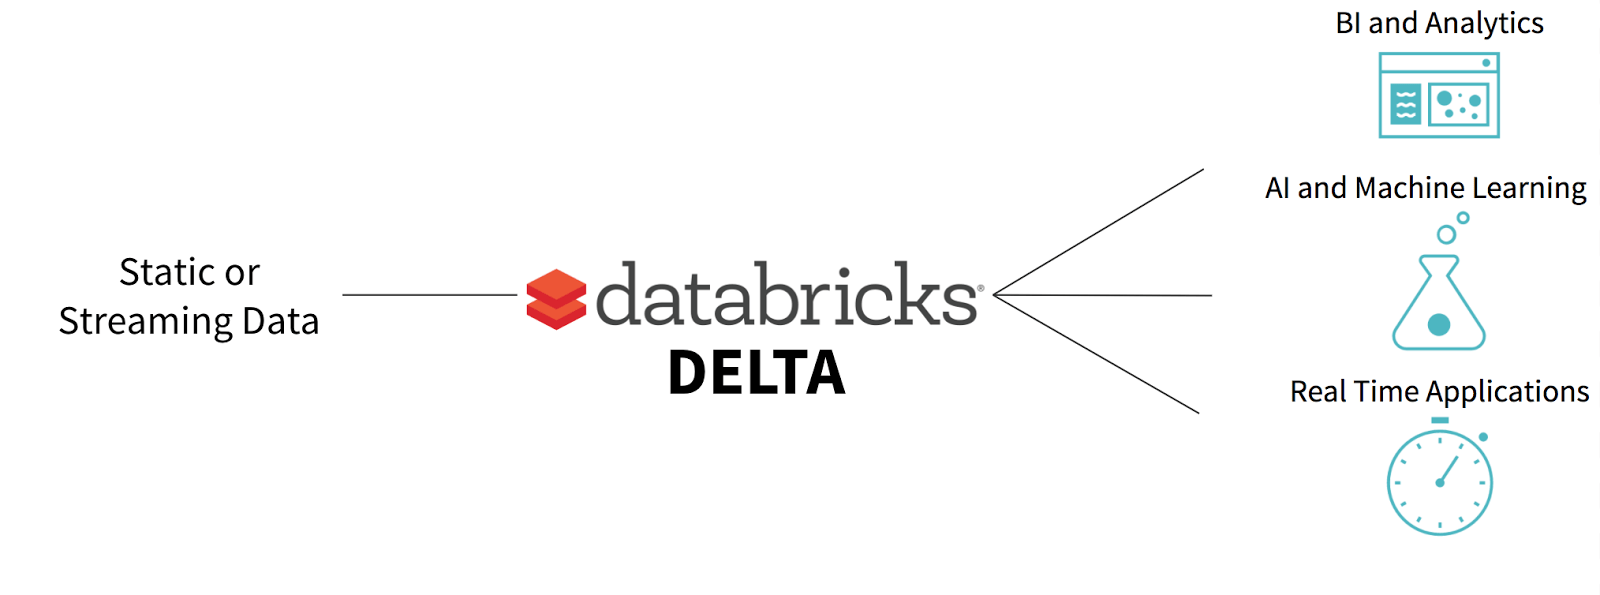 A Unified Data Management System for Real-time Big Data. Image credits Databricks